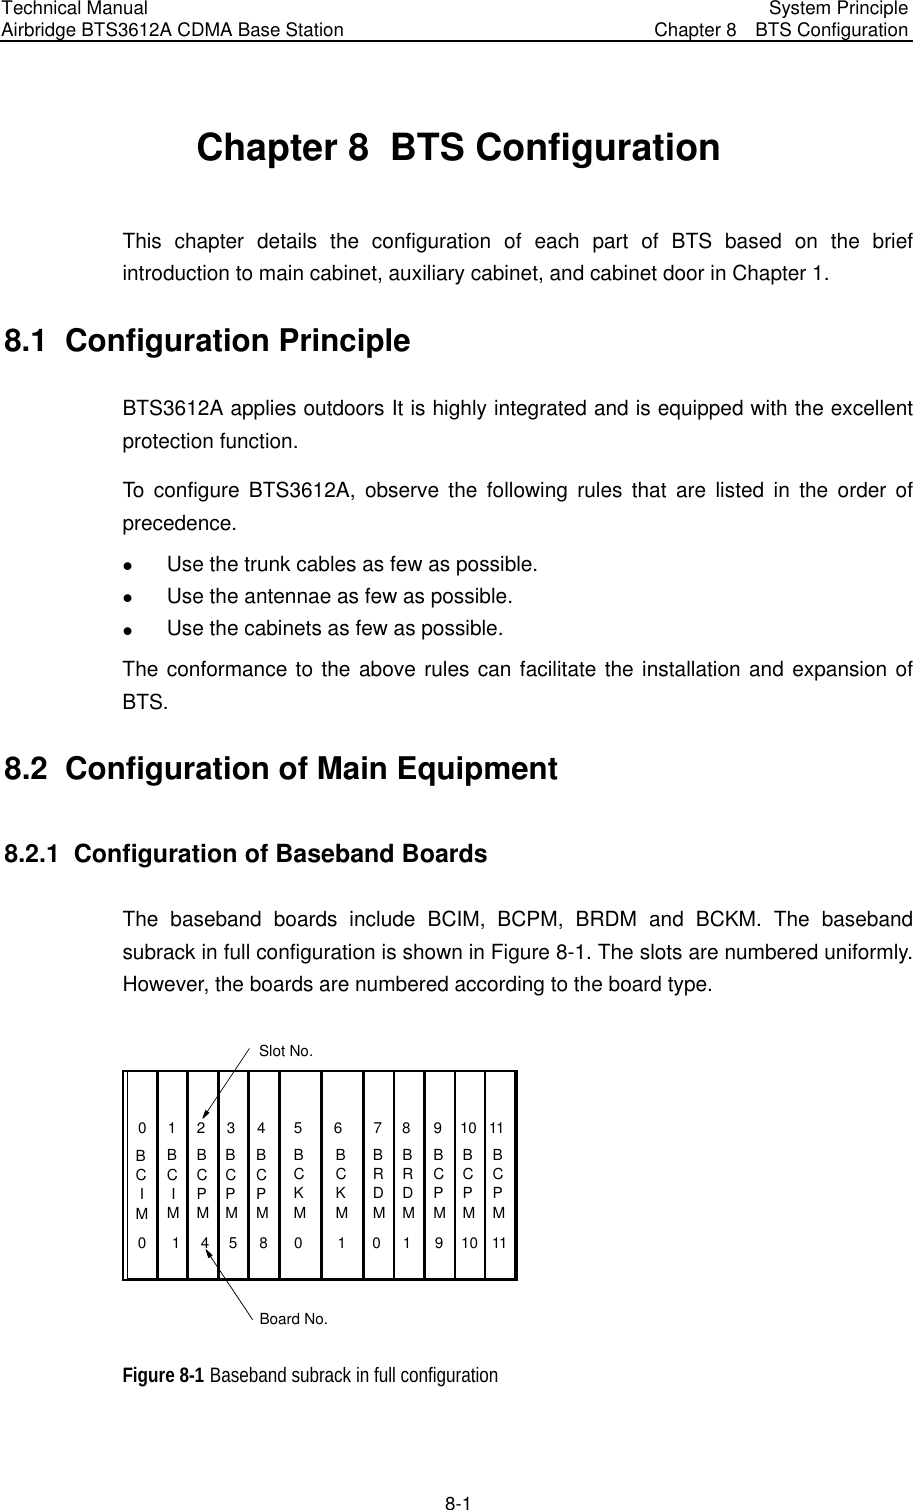 Technical Manual Airbridge BTS3612A CDMA Base Station  System Principle Chapter 8  BTS Configuration  8-1 Chapter 8  BTS Configuration This chapter details the configuration of each part of BTS based on the brief introduction to main cabinet, auxiliary cabinet, and cabinet door in Chapter 1. 8.1  Configuration Principle BTS3612A applies outdoors It is highly integrated and is equipped with the excellent protection function.   To configure BTS3612A, observe the following rules that are listed in the order of precedence. z Use the trunk cables as few as possible.   z Use the antennae as few as possible. z Use the cabinets as few as possible.   The conformance to the above rules can facilitate the installation and expansion of BTS. 8.2  Configuration of Main Equipment   8.2.1  Configuration of Baseband Boards   The baseband boards include BCIM, BCPM, BRDM and BCKM. The baseband subrack in full configuration is shown in Figure 8-1. The slots are numbered uniformly. However, the boards are numbered according to the board type.   Slot No.Board No.0BC IM1BC IM2BCPM3BCPMBCKMBCKMBRDMBRDMBCPMBCPMBCPM5678910110145 0 101910114BCPM8 Figure 8-1 Baseband subrack in full configuration 